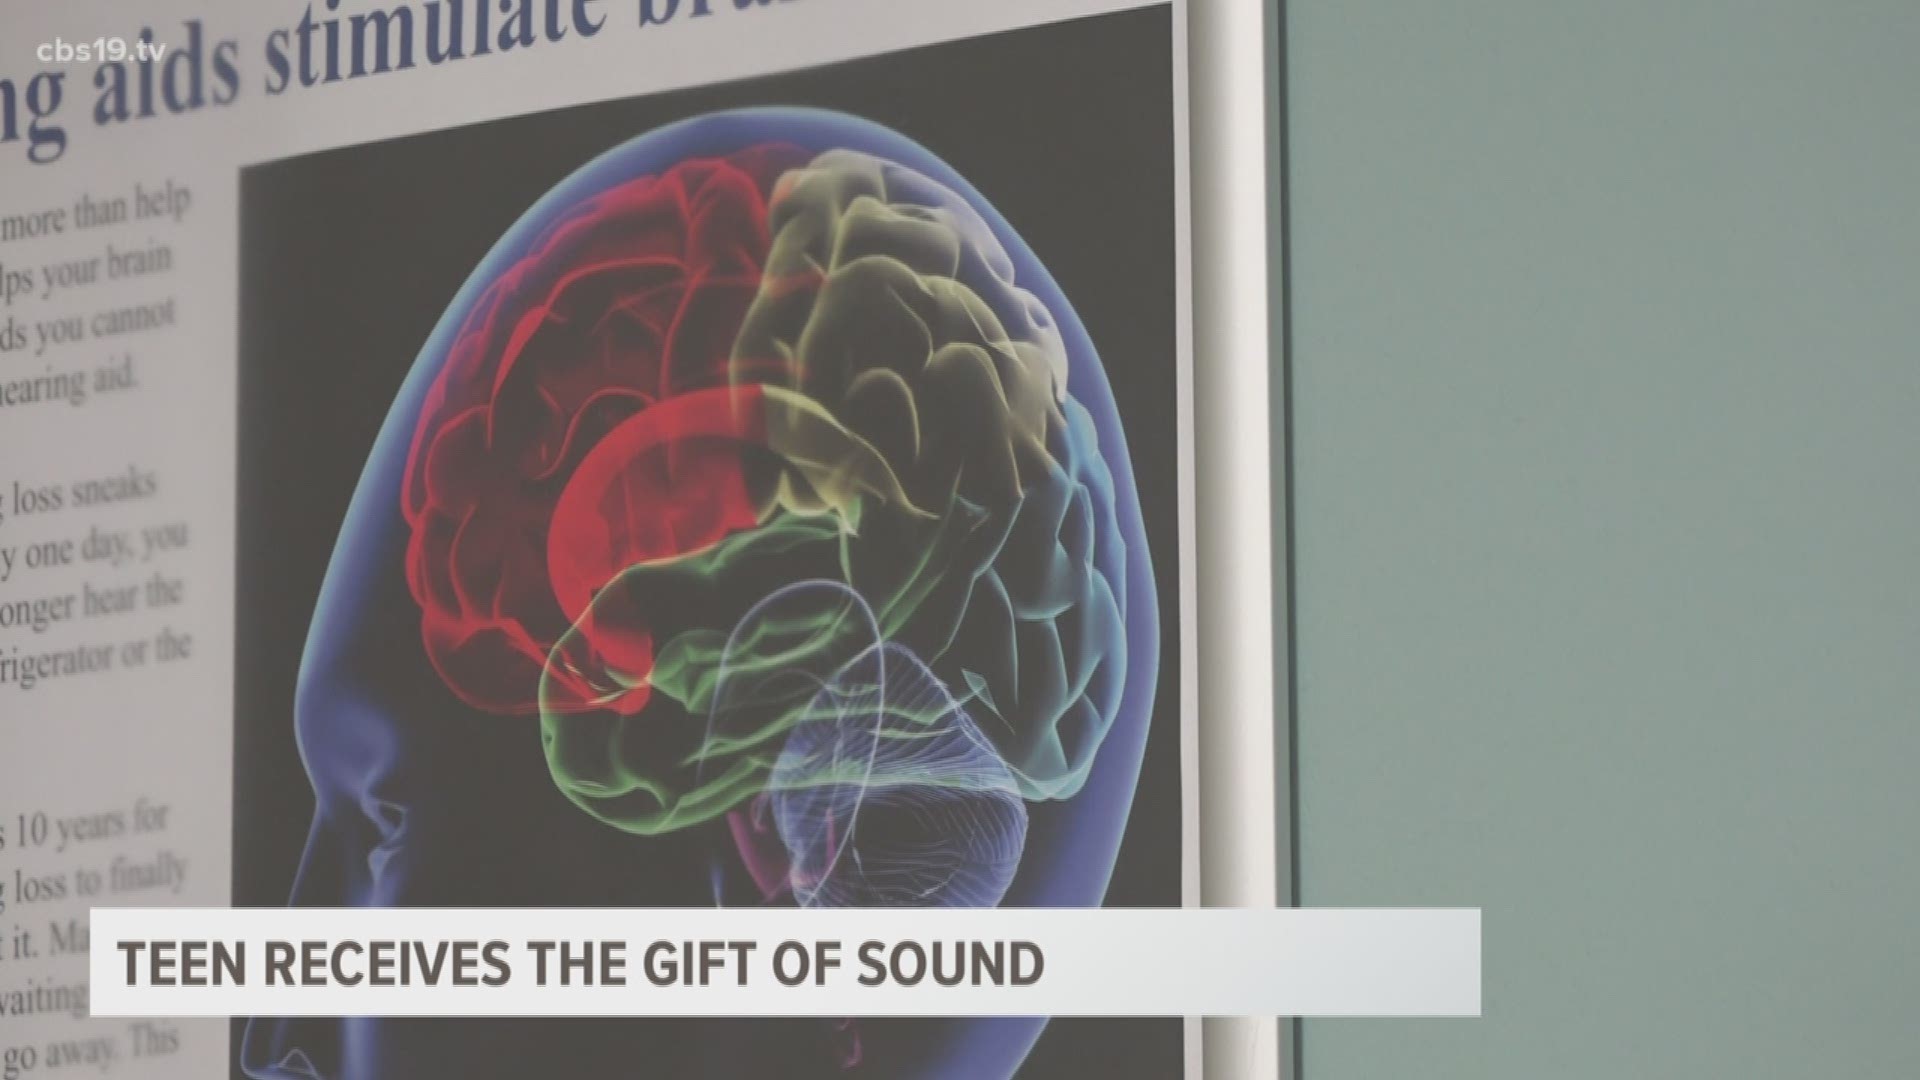 ETX teen receives the gift of sound